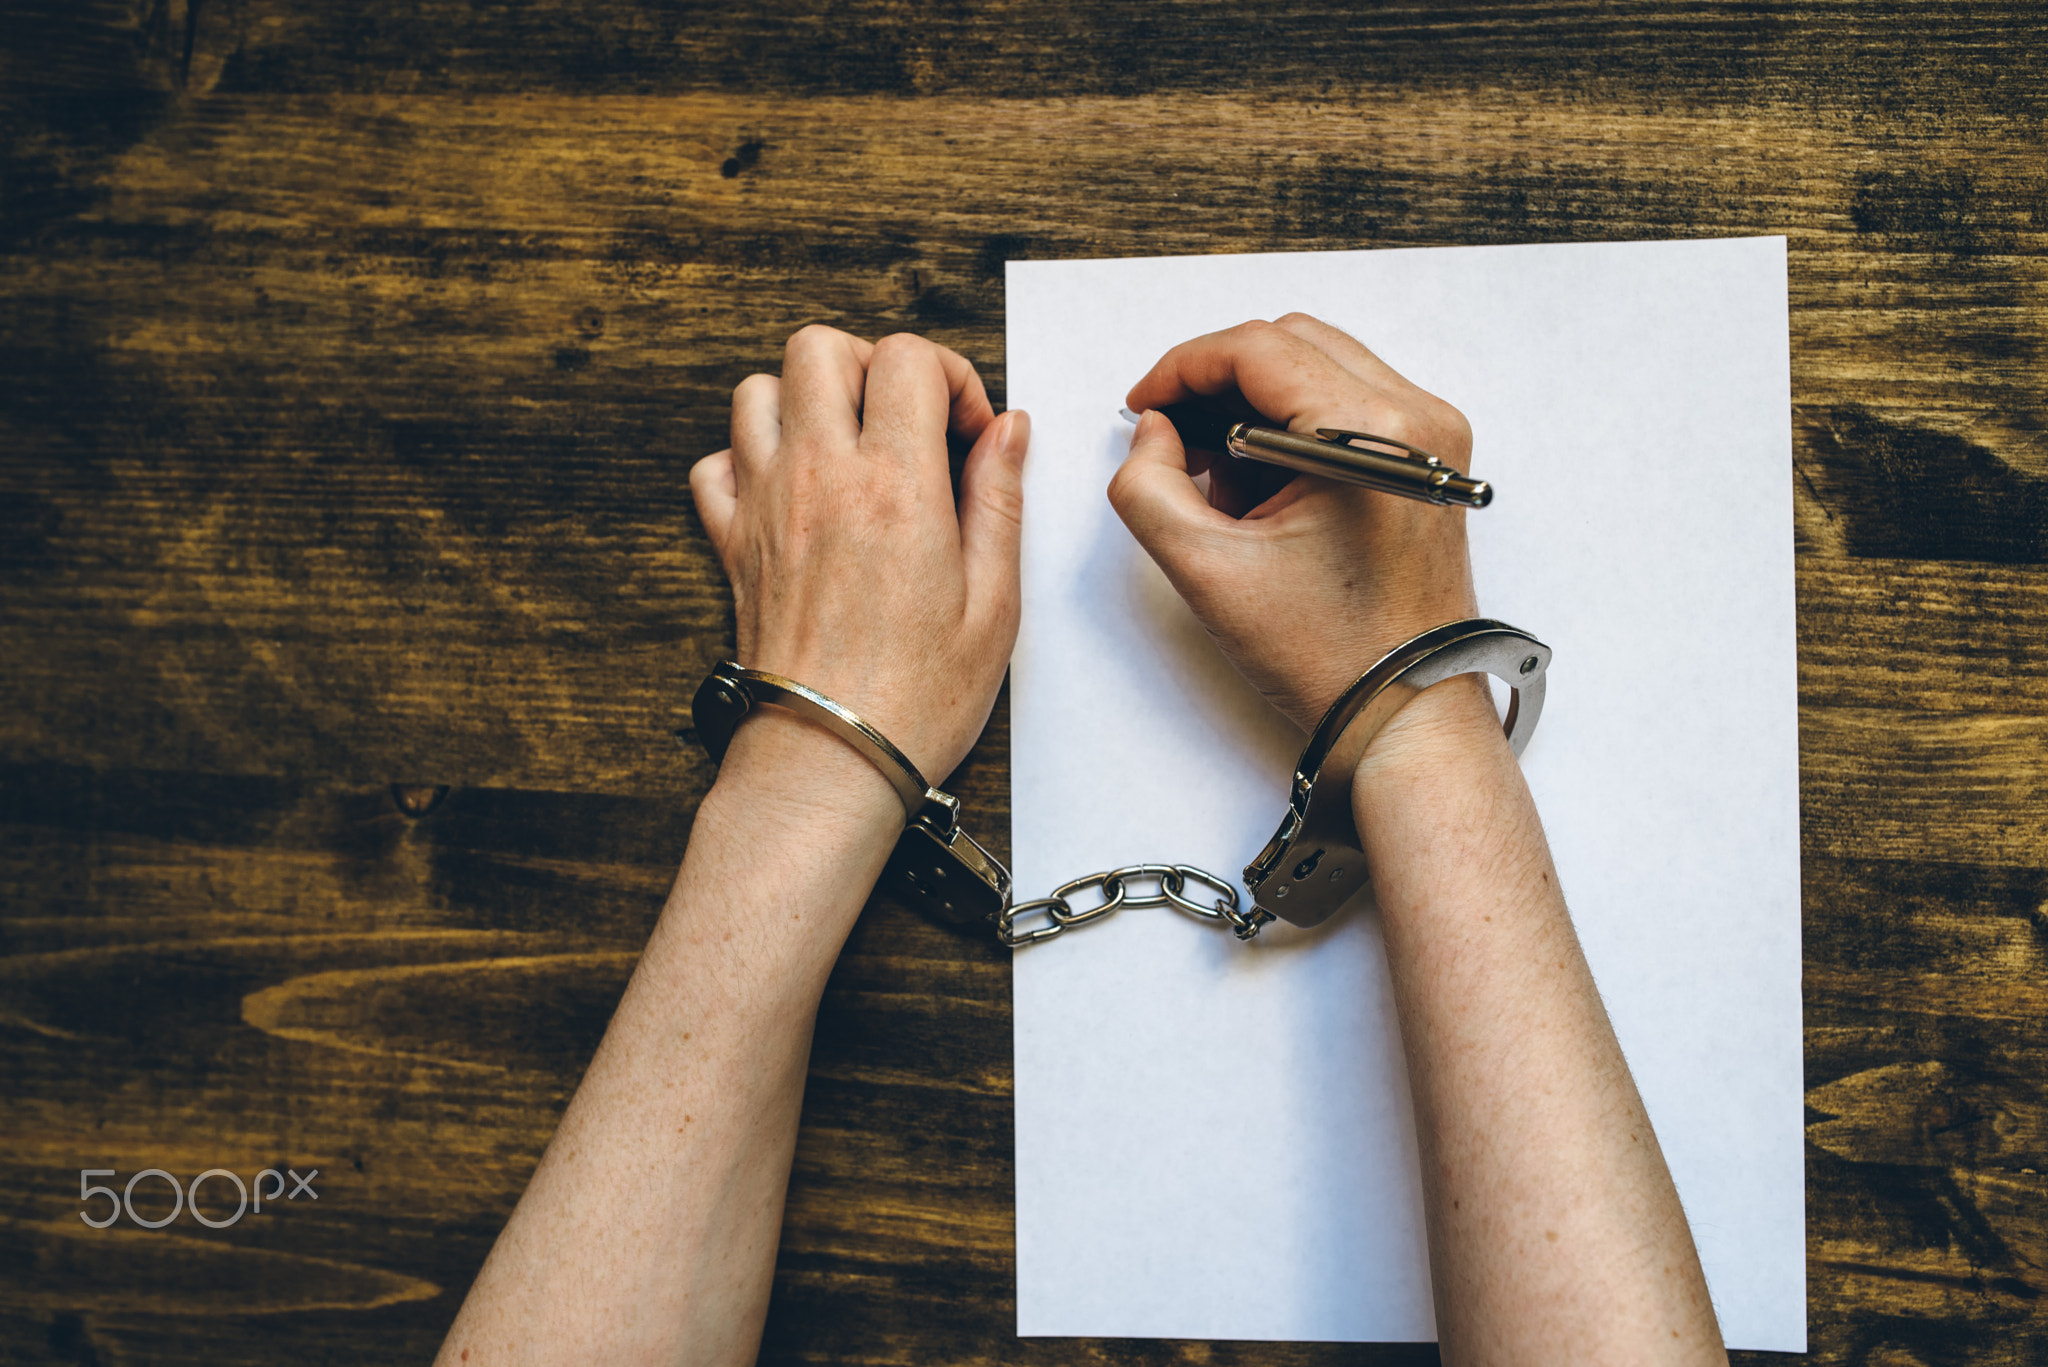 Female hands cuffed signing confession, top view